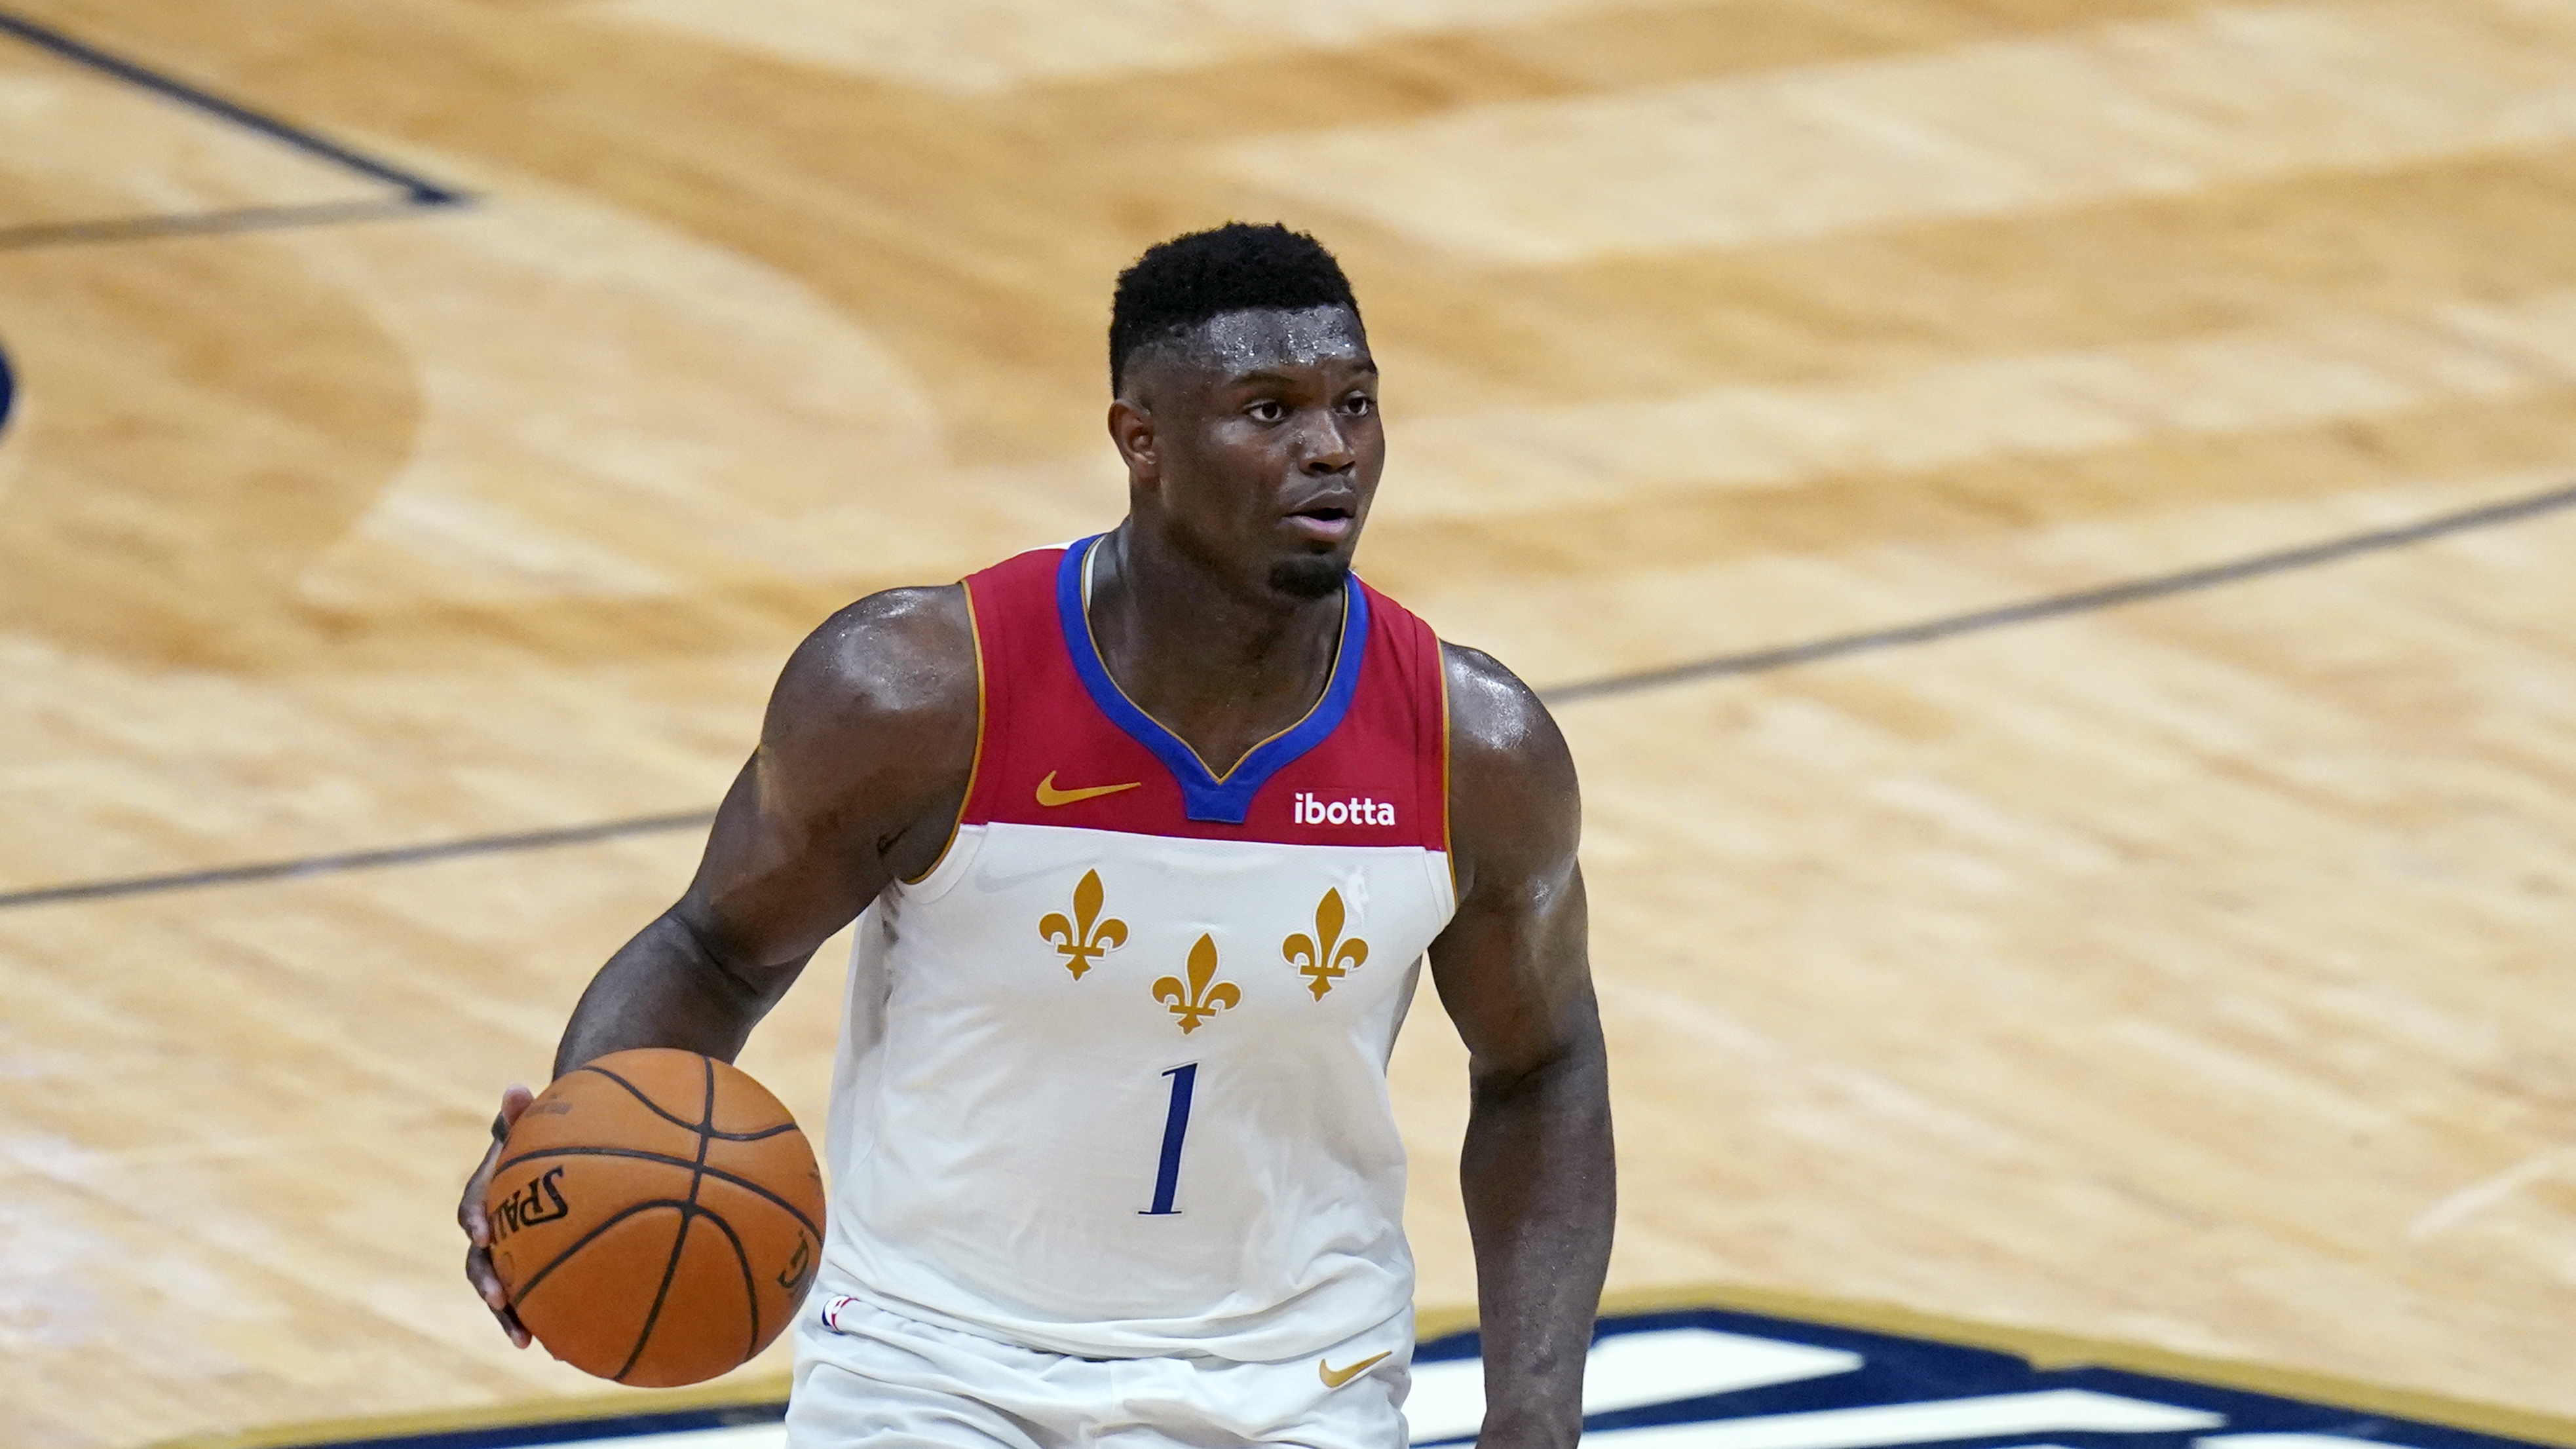 Pelicans' Zion Williamson says he's great 'mentally and physically